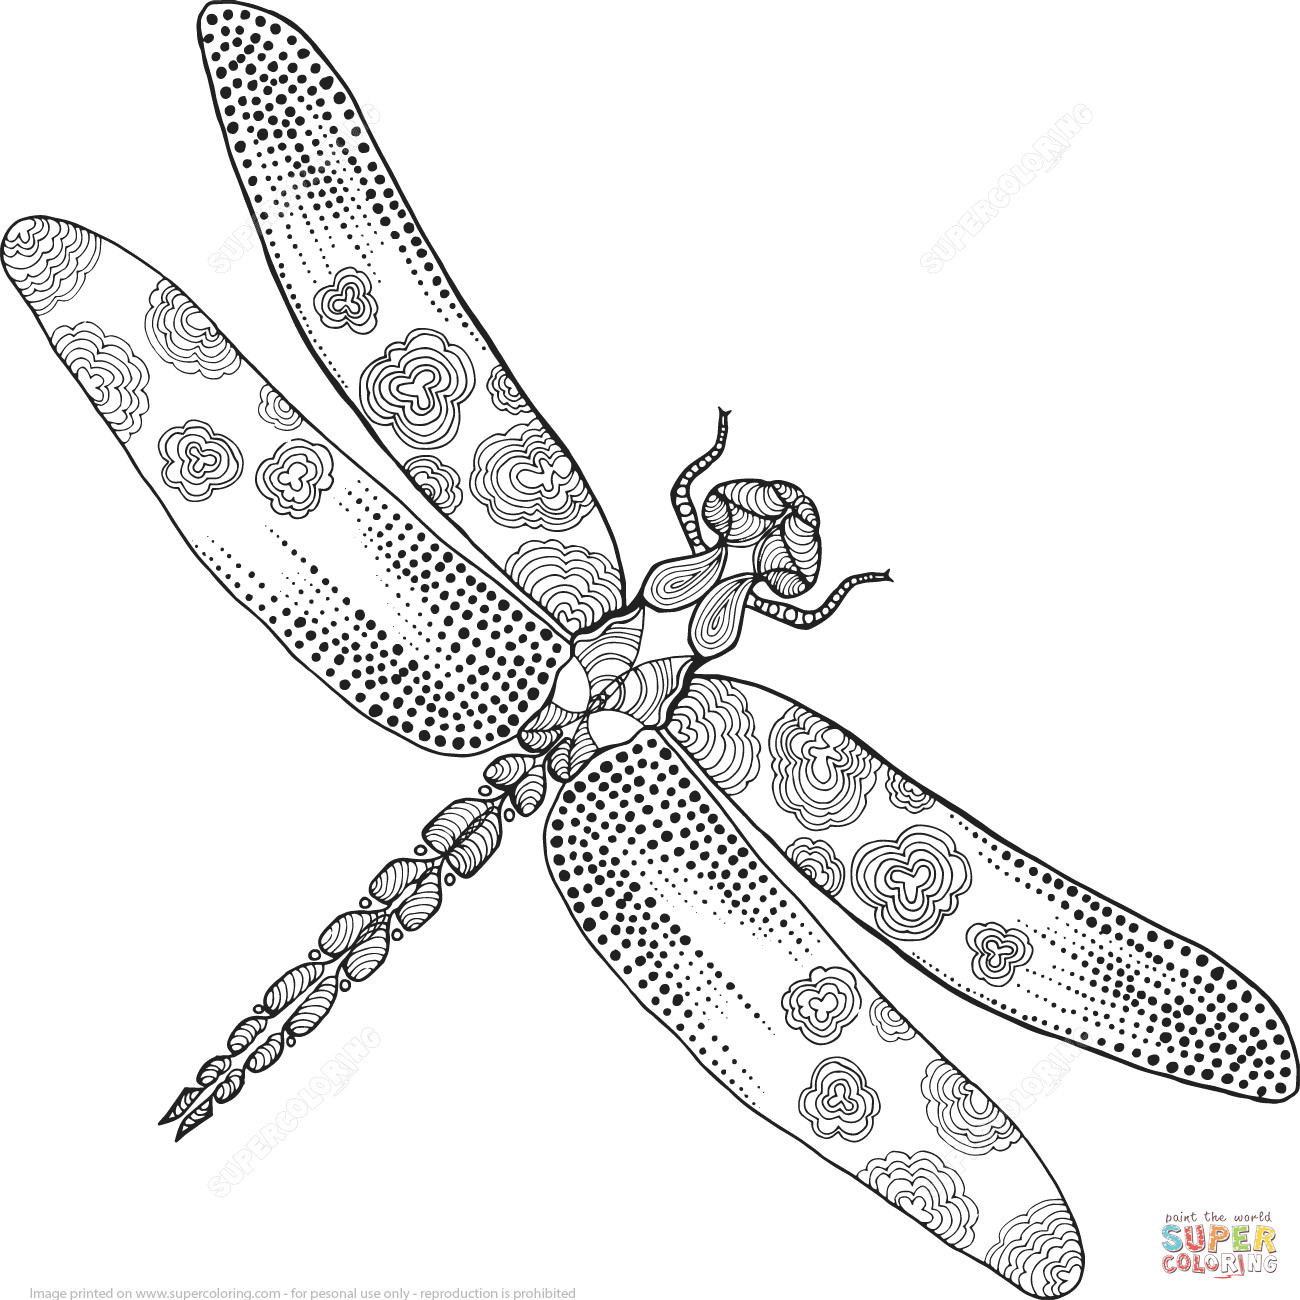 Dragonfly Coloring Pages For Adults
 Zentangle Dragonfly coloring page